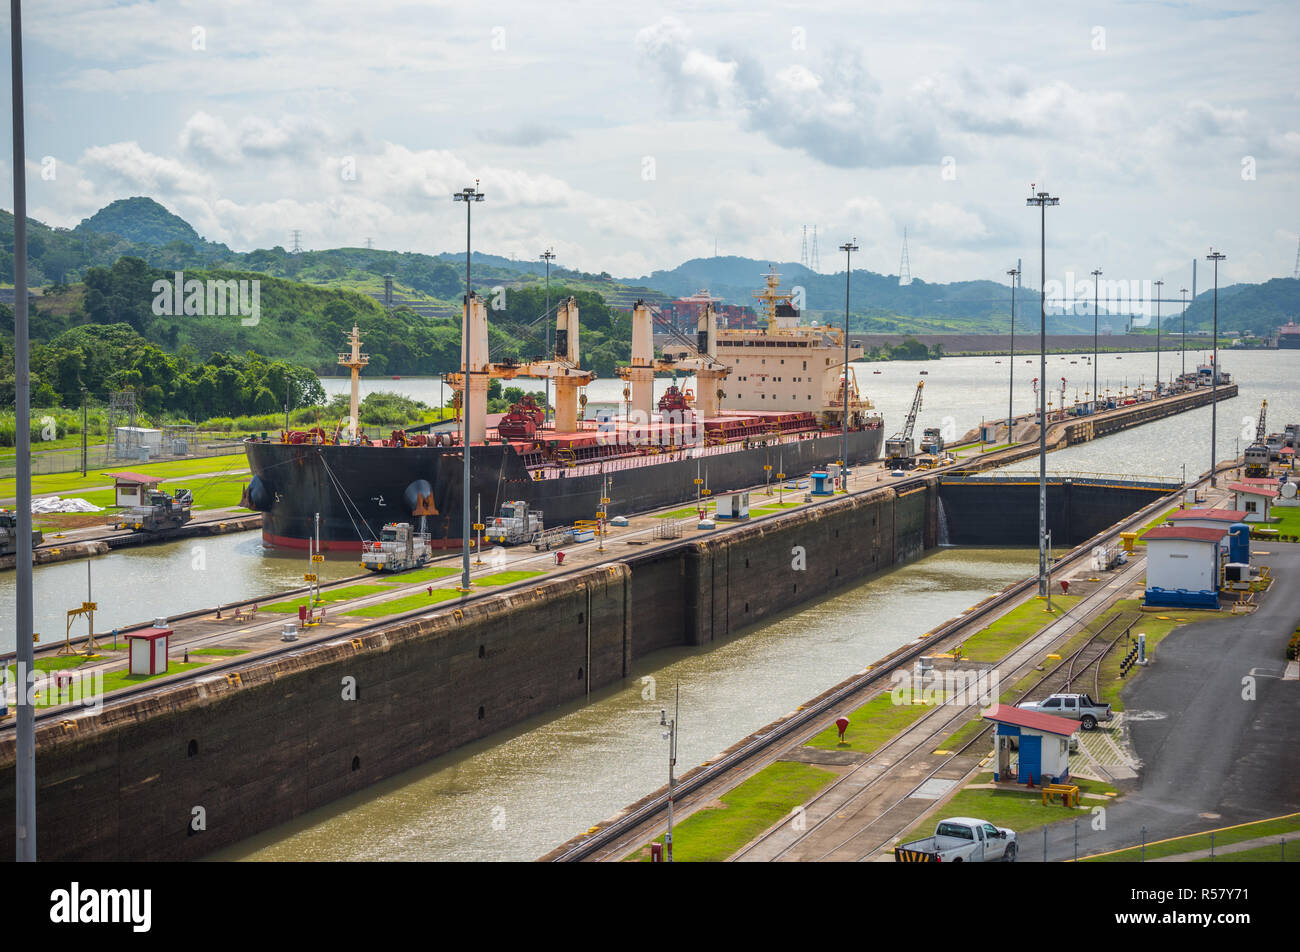 Large cargo ships pass through the Panama Canal locks.  This everyday event, provides income from both fees and tourism for the whole country. Stock Photo